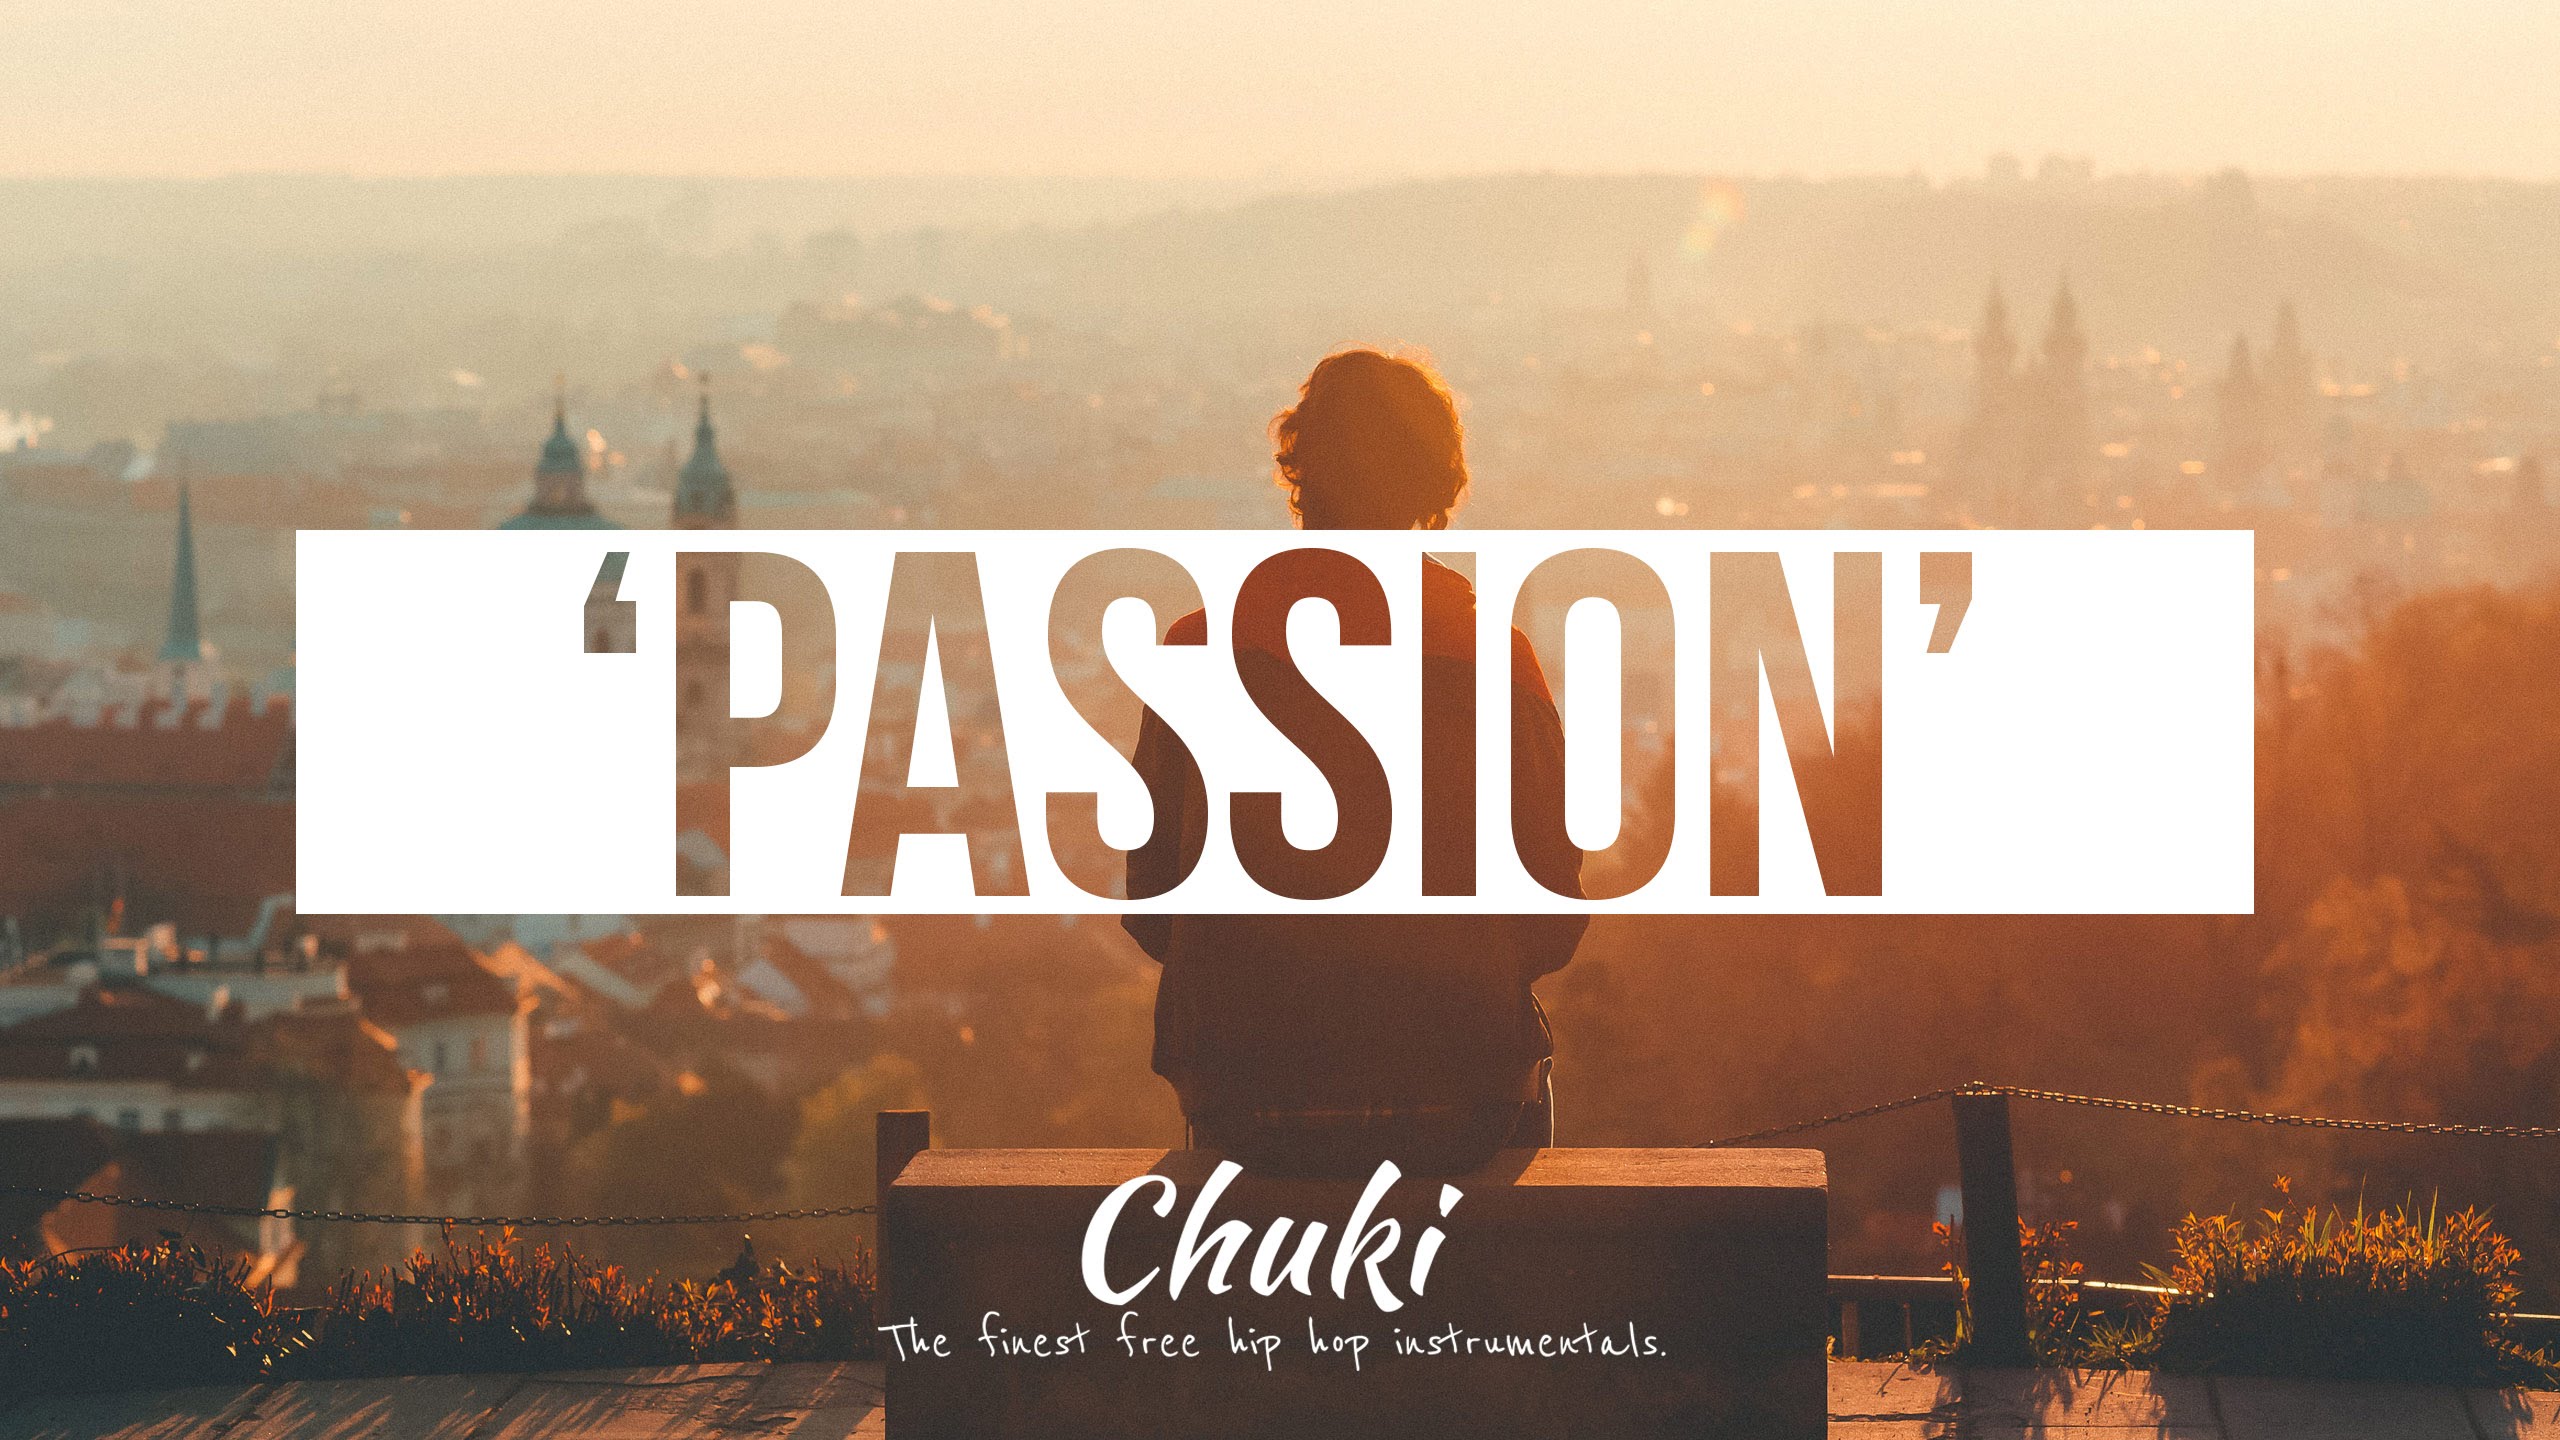 Passion' Real Chill Old School Hip Hop Instrumentals Rap Beat ...